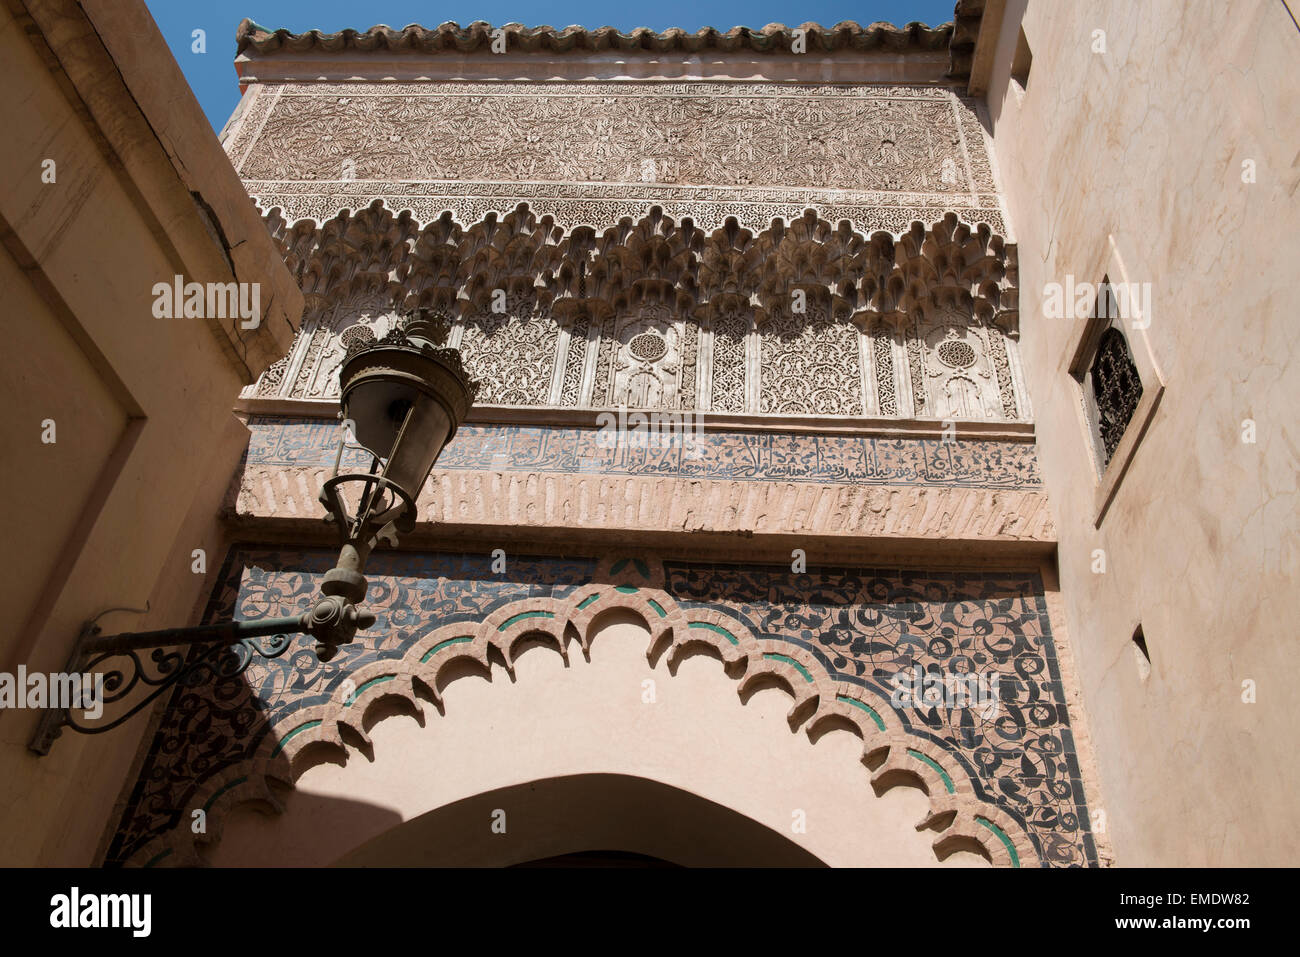 Madrasa Ben Youssef, Marrakech, Morocco.  Largest madrasa in Morroco founded in 14th century. Stock Photo